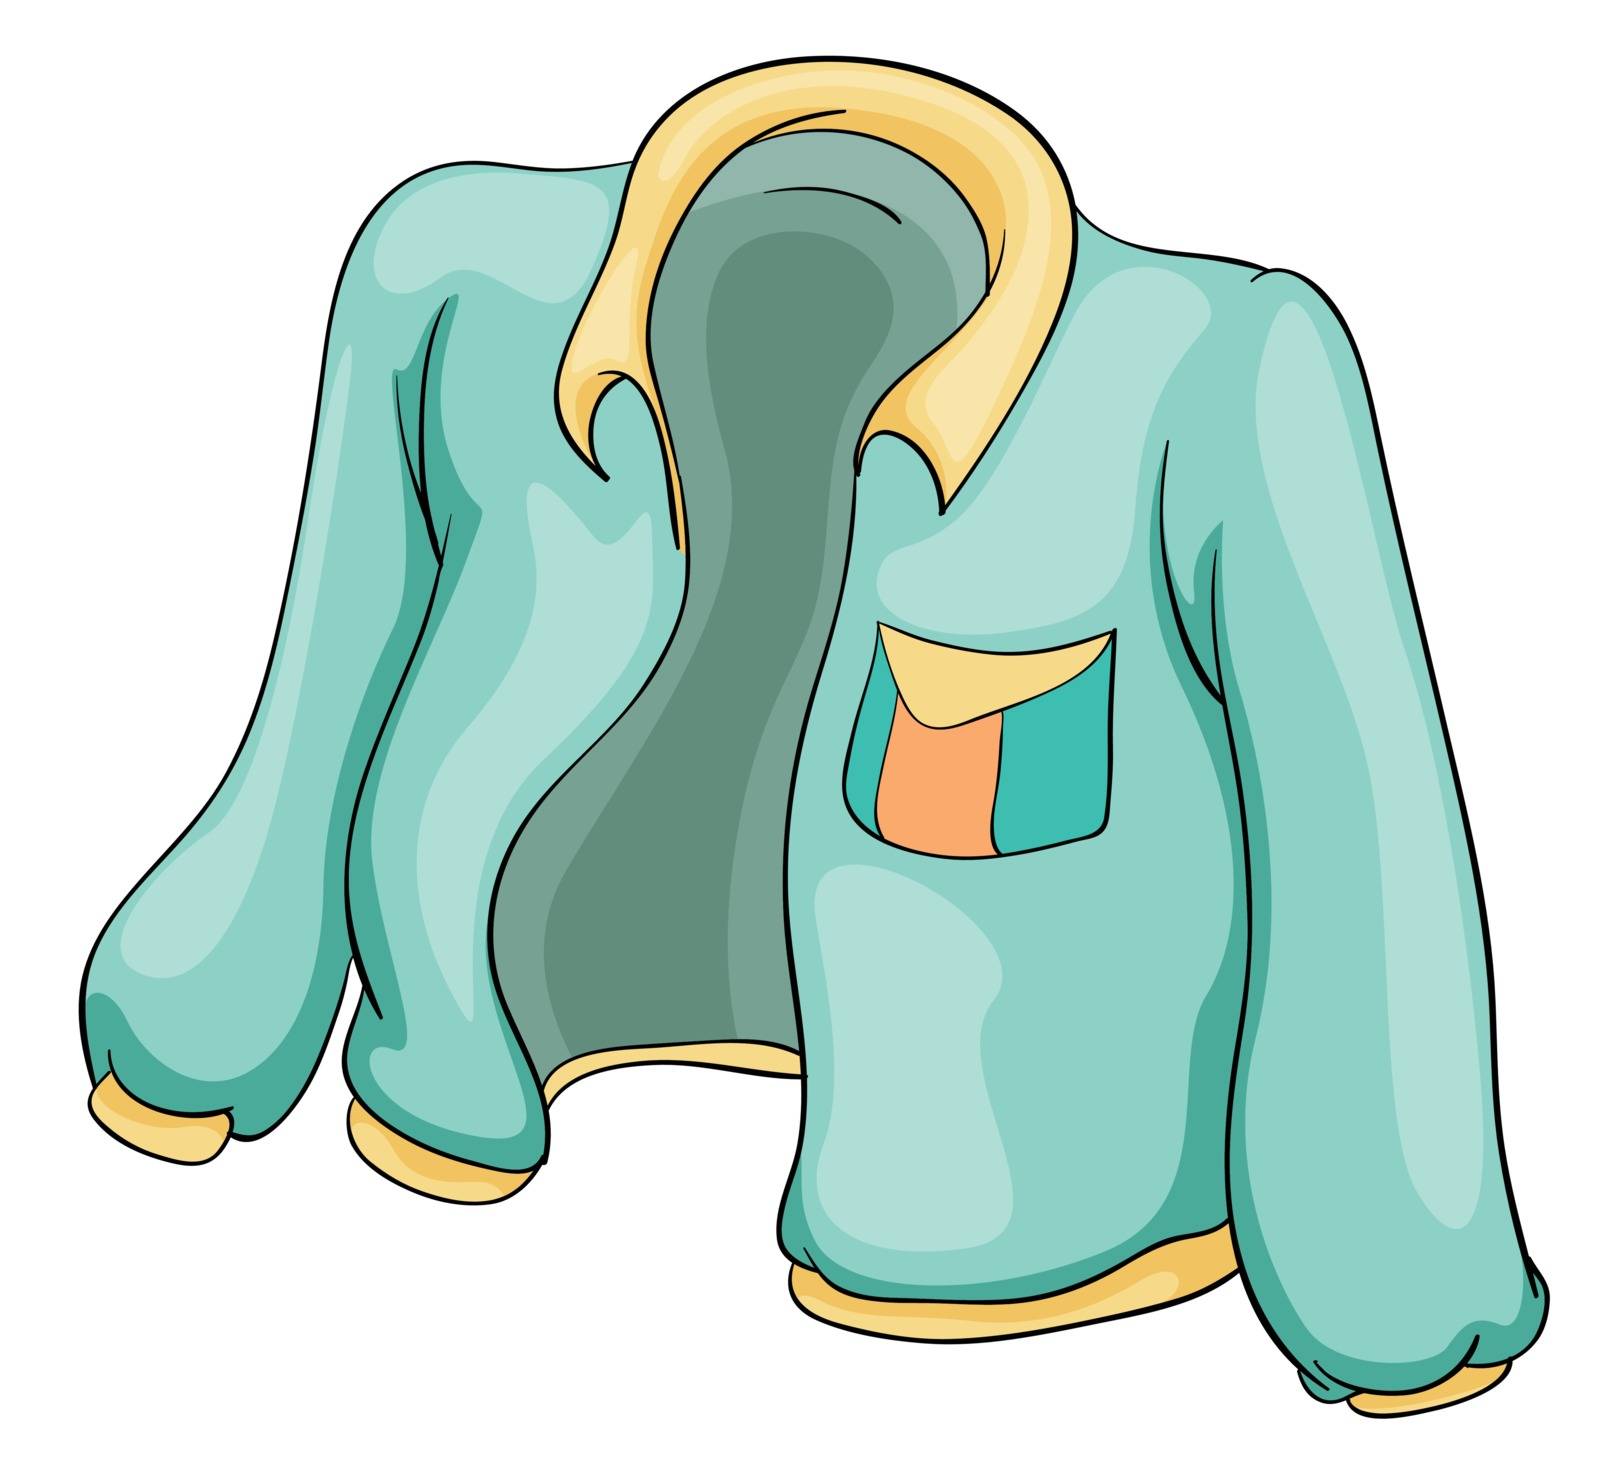 Illustration of an isolated jacket